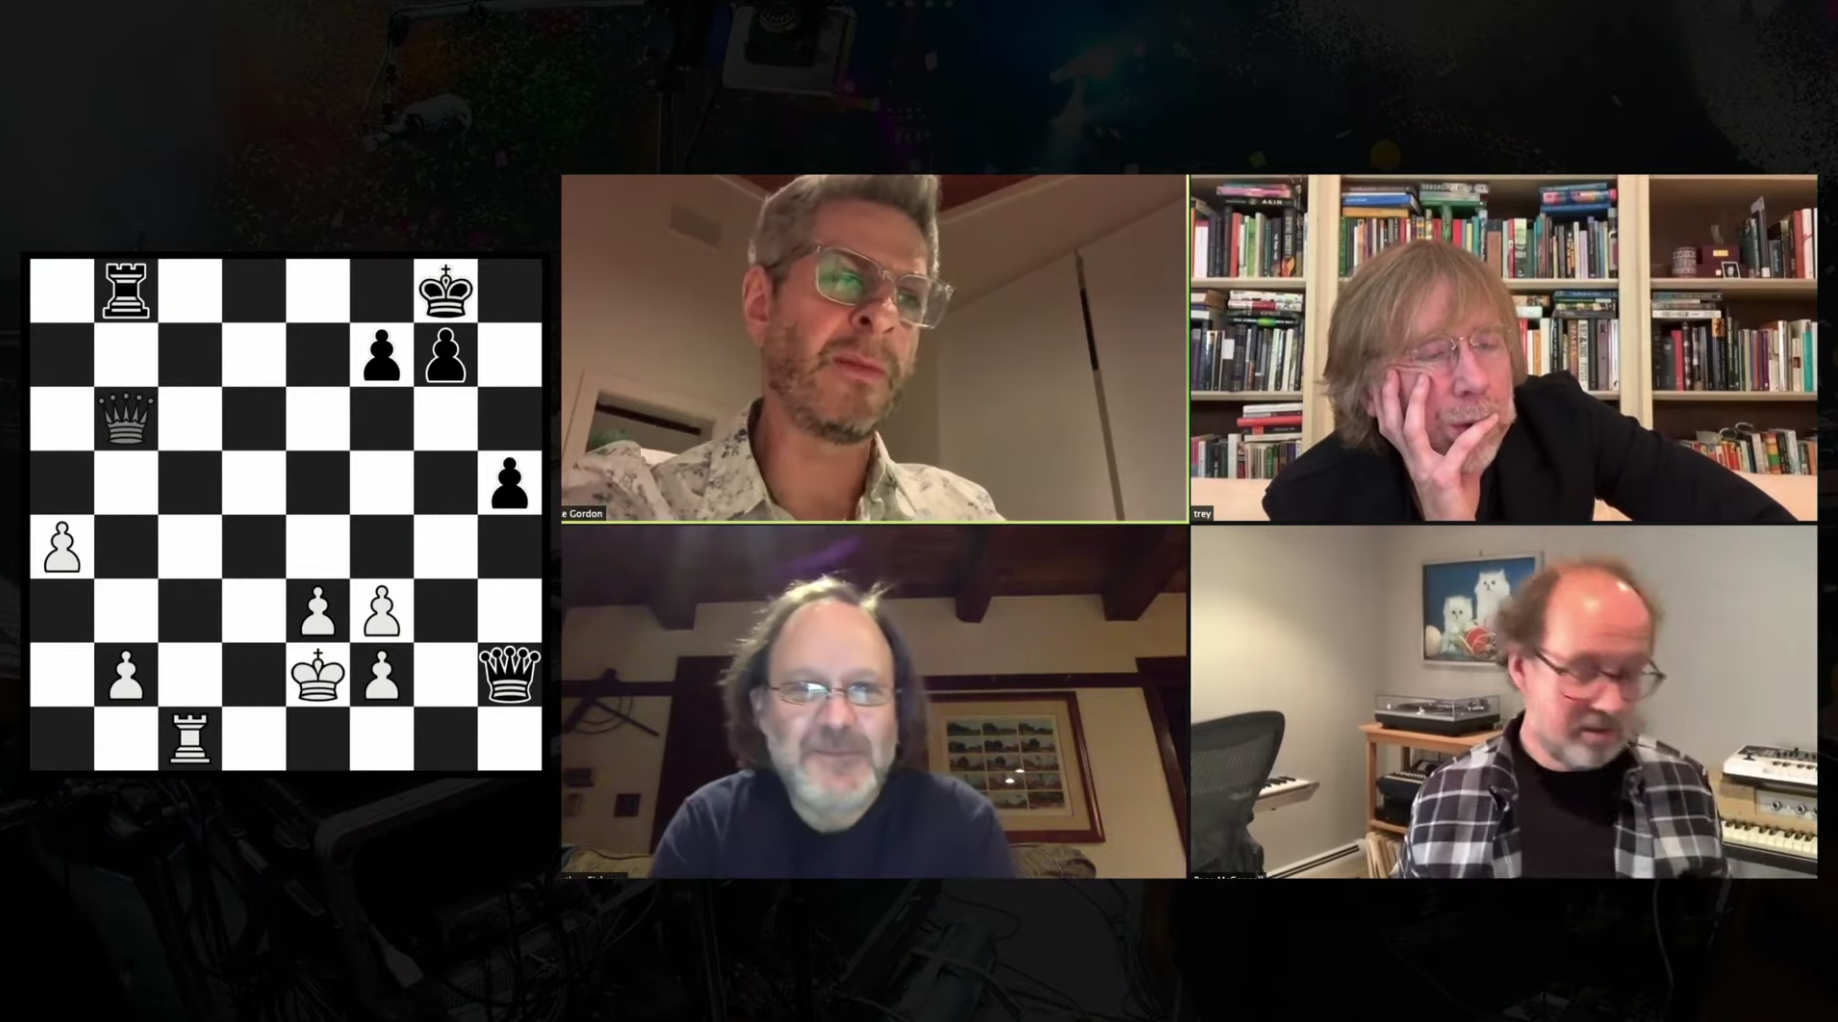 Phish Defeat Audience in Chess During ‘Dinner and a Rematch’ NYE Broadcast